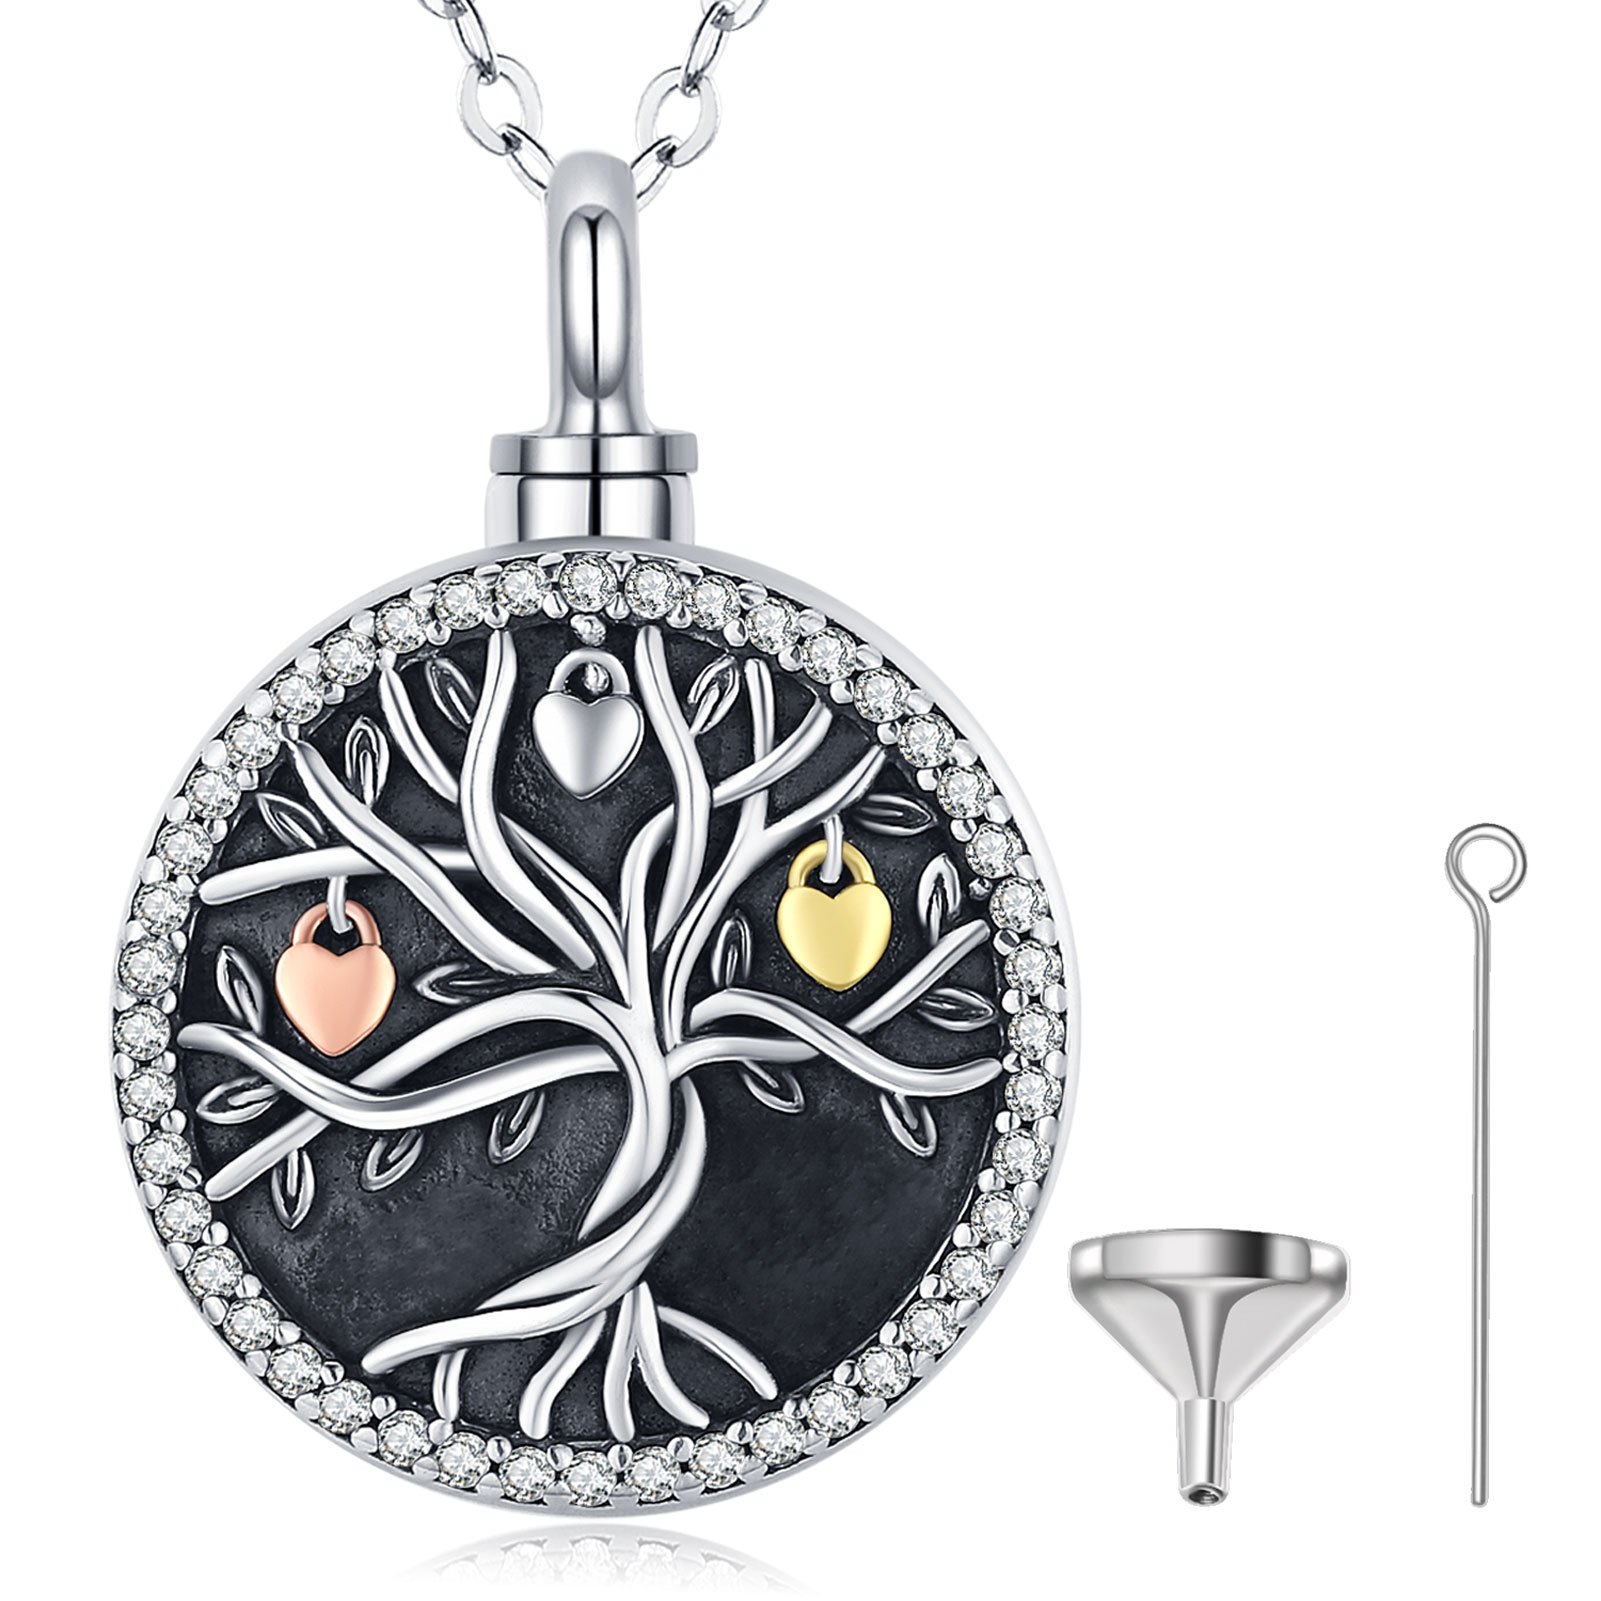 Merryshine Jewelry Tree of Life Design 925 Sterling Silver Urn Cremation Jewelry Necklace